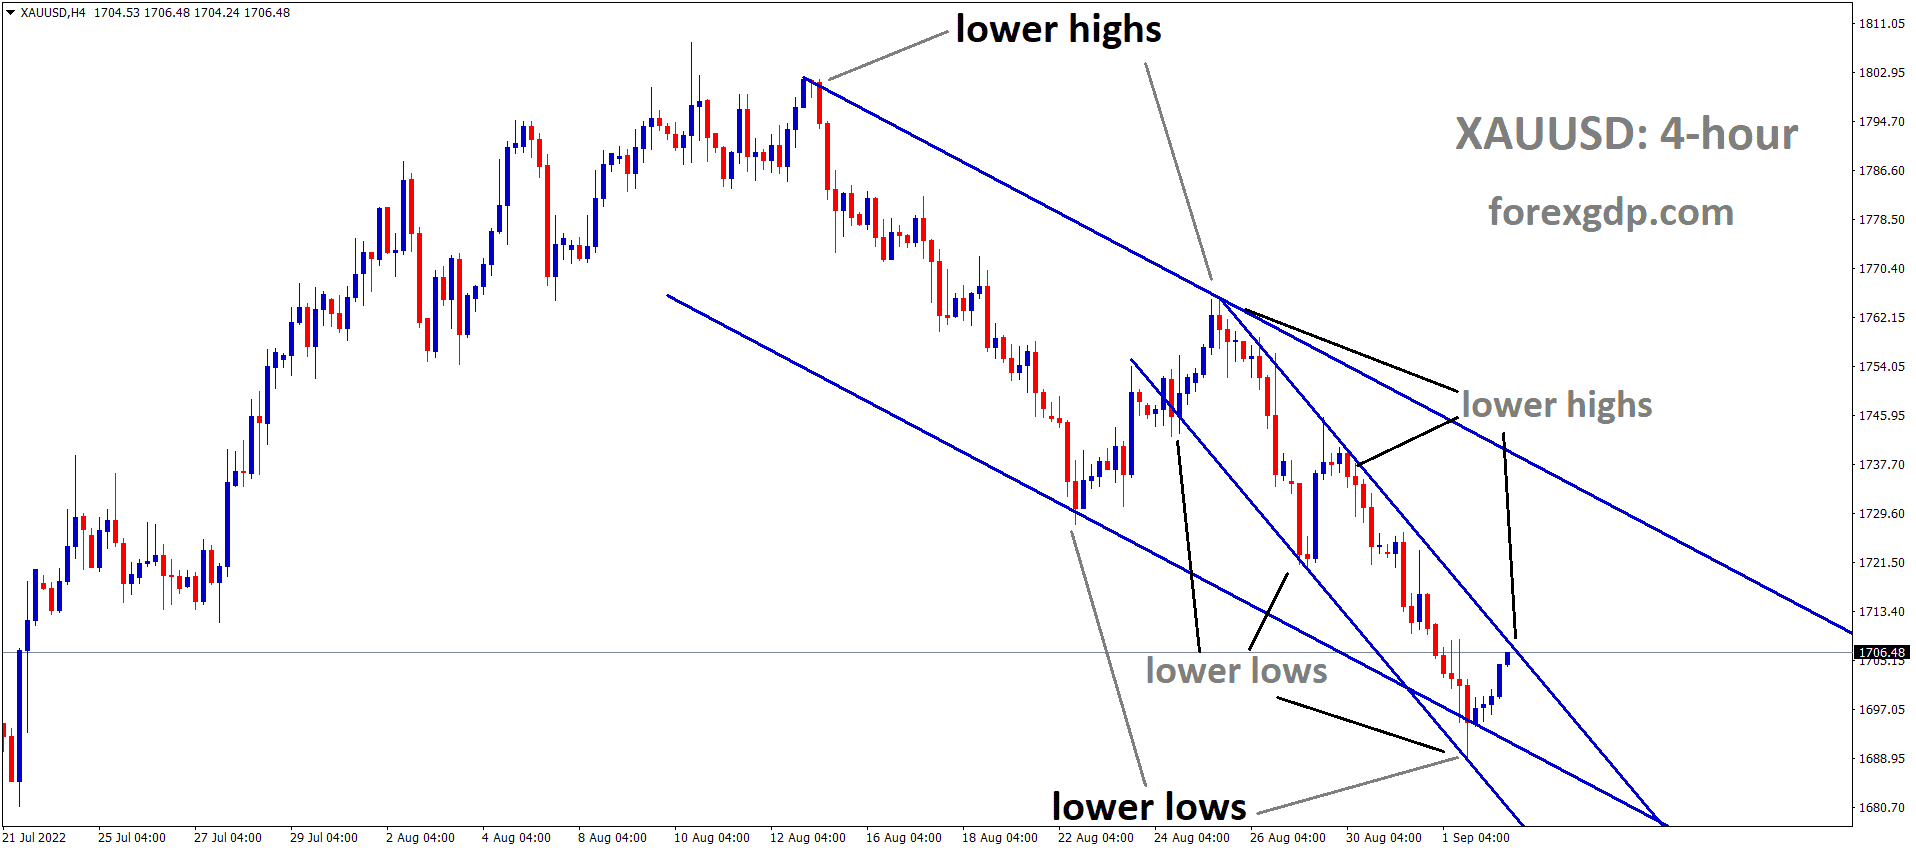 XAUUSD Gold price is moving in the major and minor Descending channel